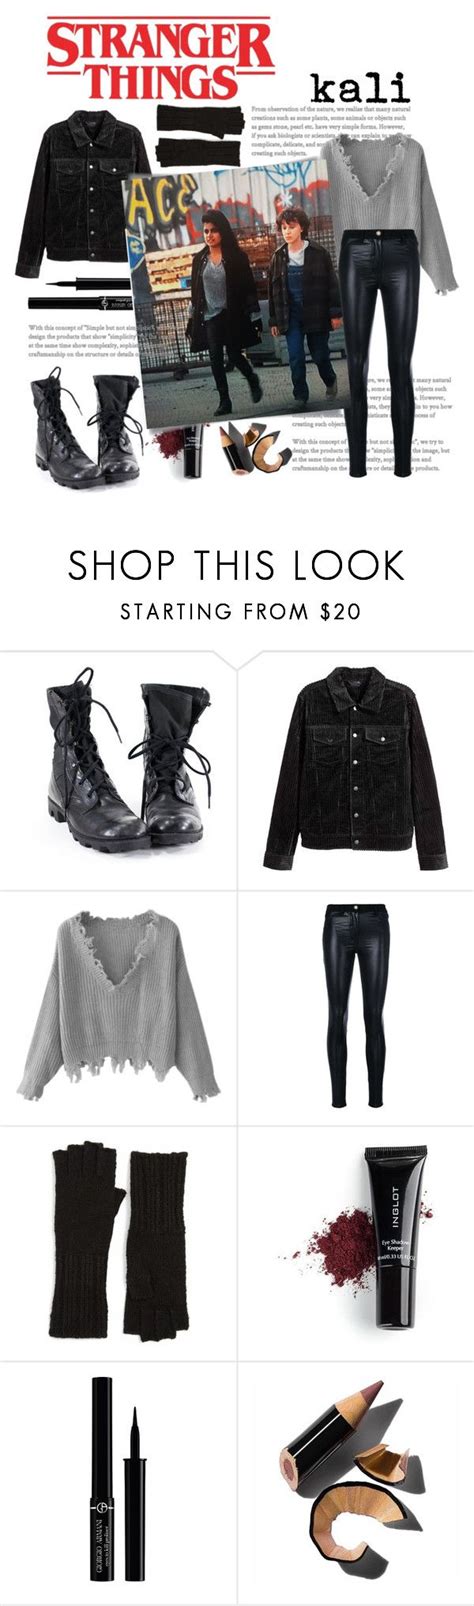 Designer Clothes Shoes And Bags For Women Ssense Stranger Things